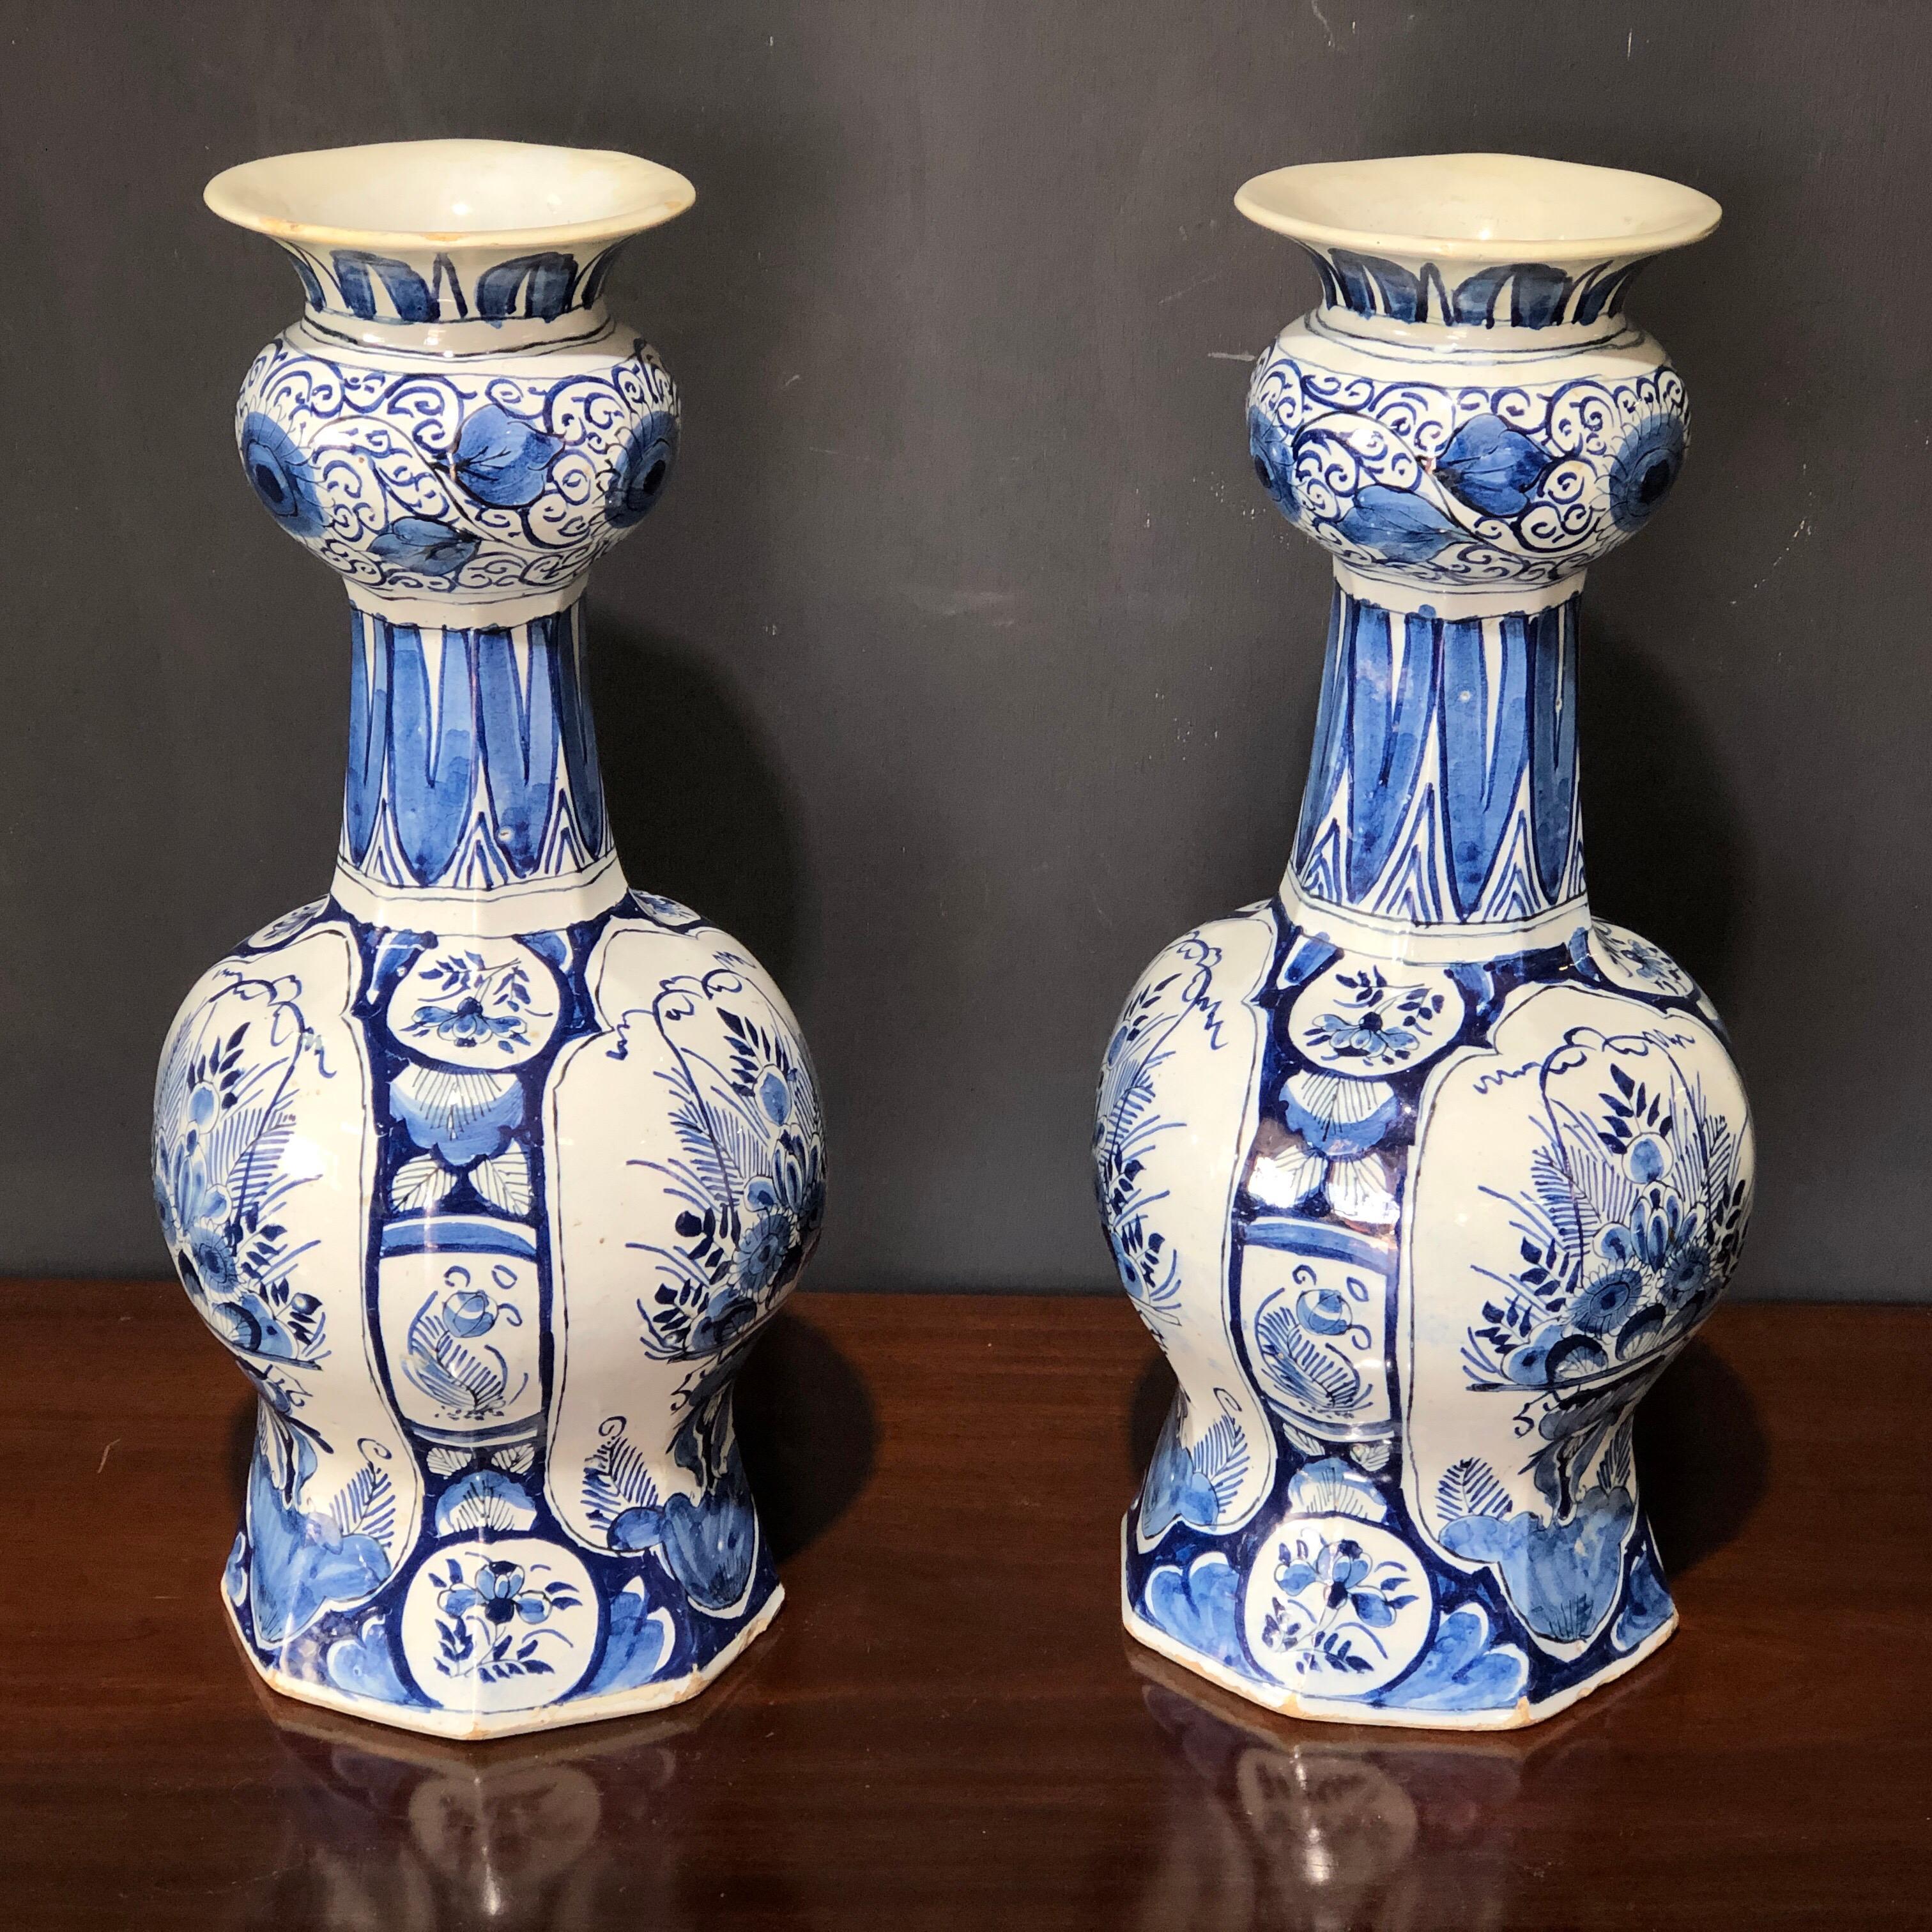 Pottery Large Pair of Dutch Delft Vases, Early 18th Century